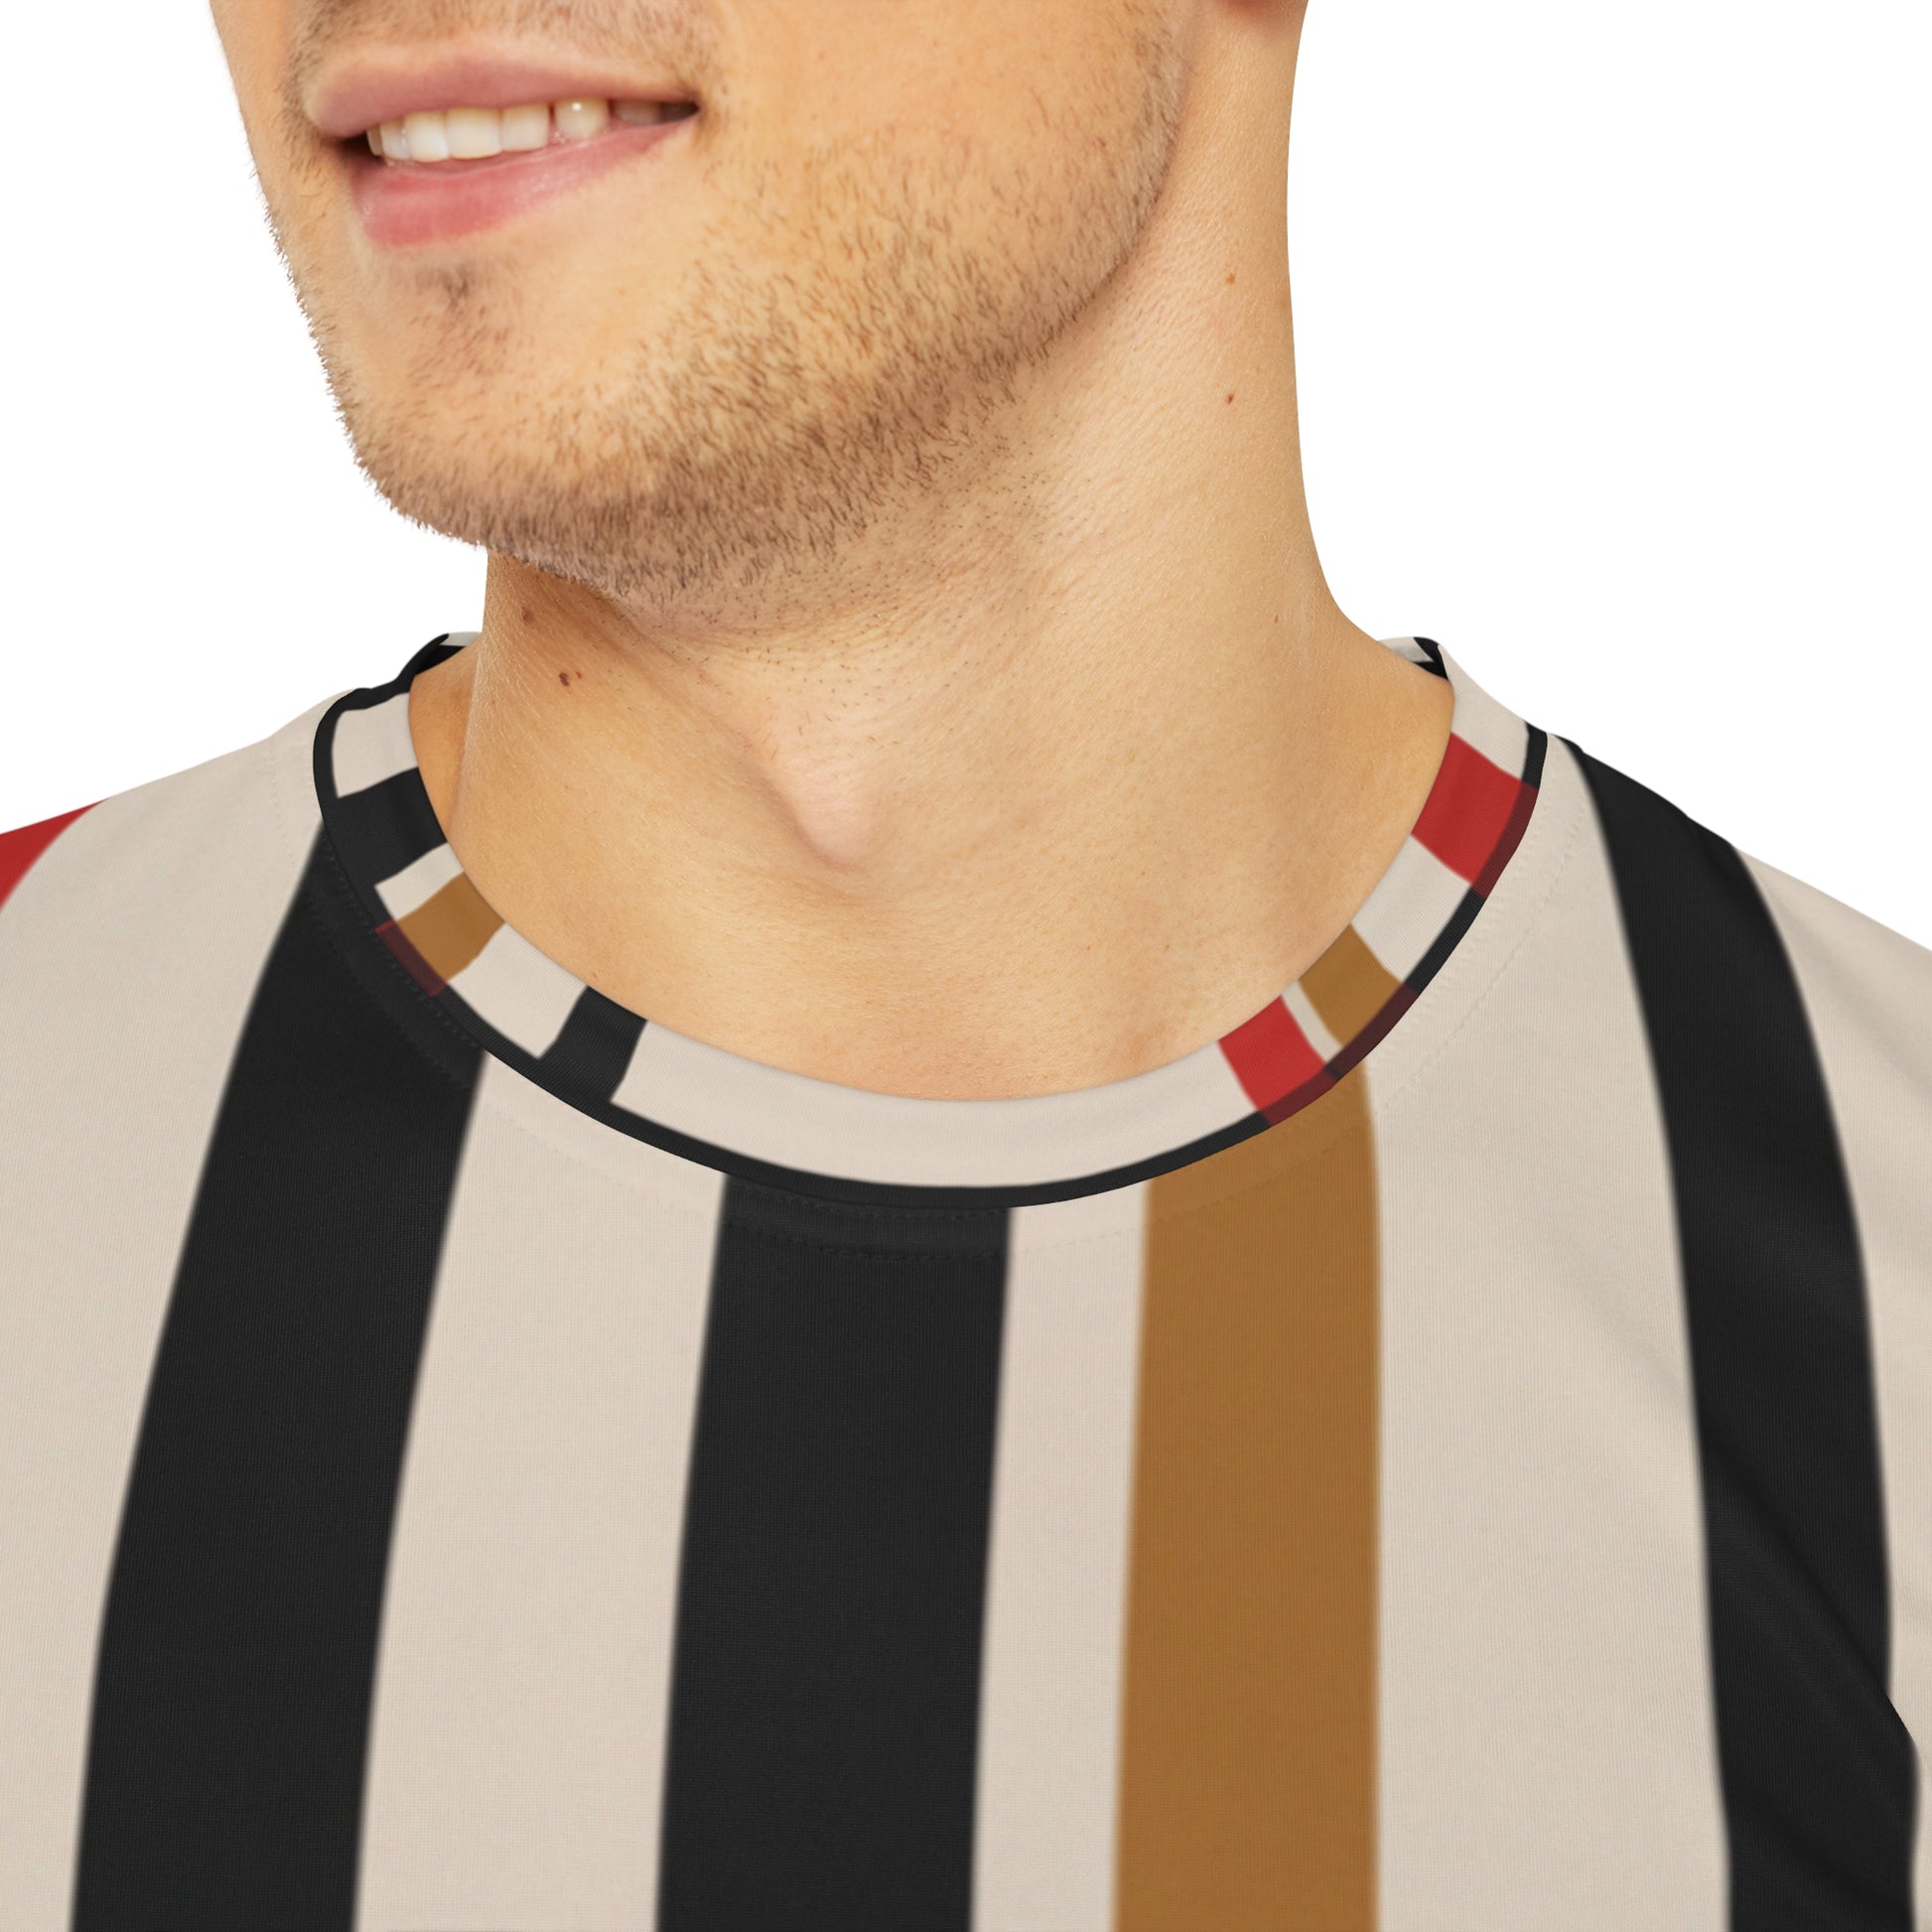 Close-up shot of the Highland Ember Dawn Crewneck Pullover All-Over Print Short-Sleeved Shirt black red mustard yellow beige plaid pattern worn by white man